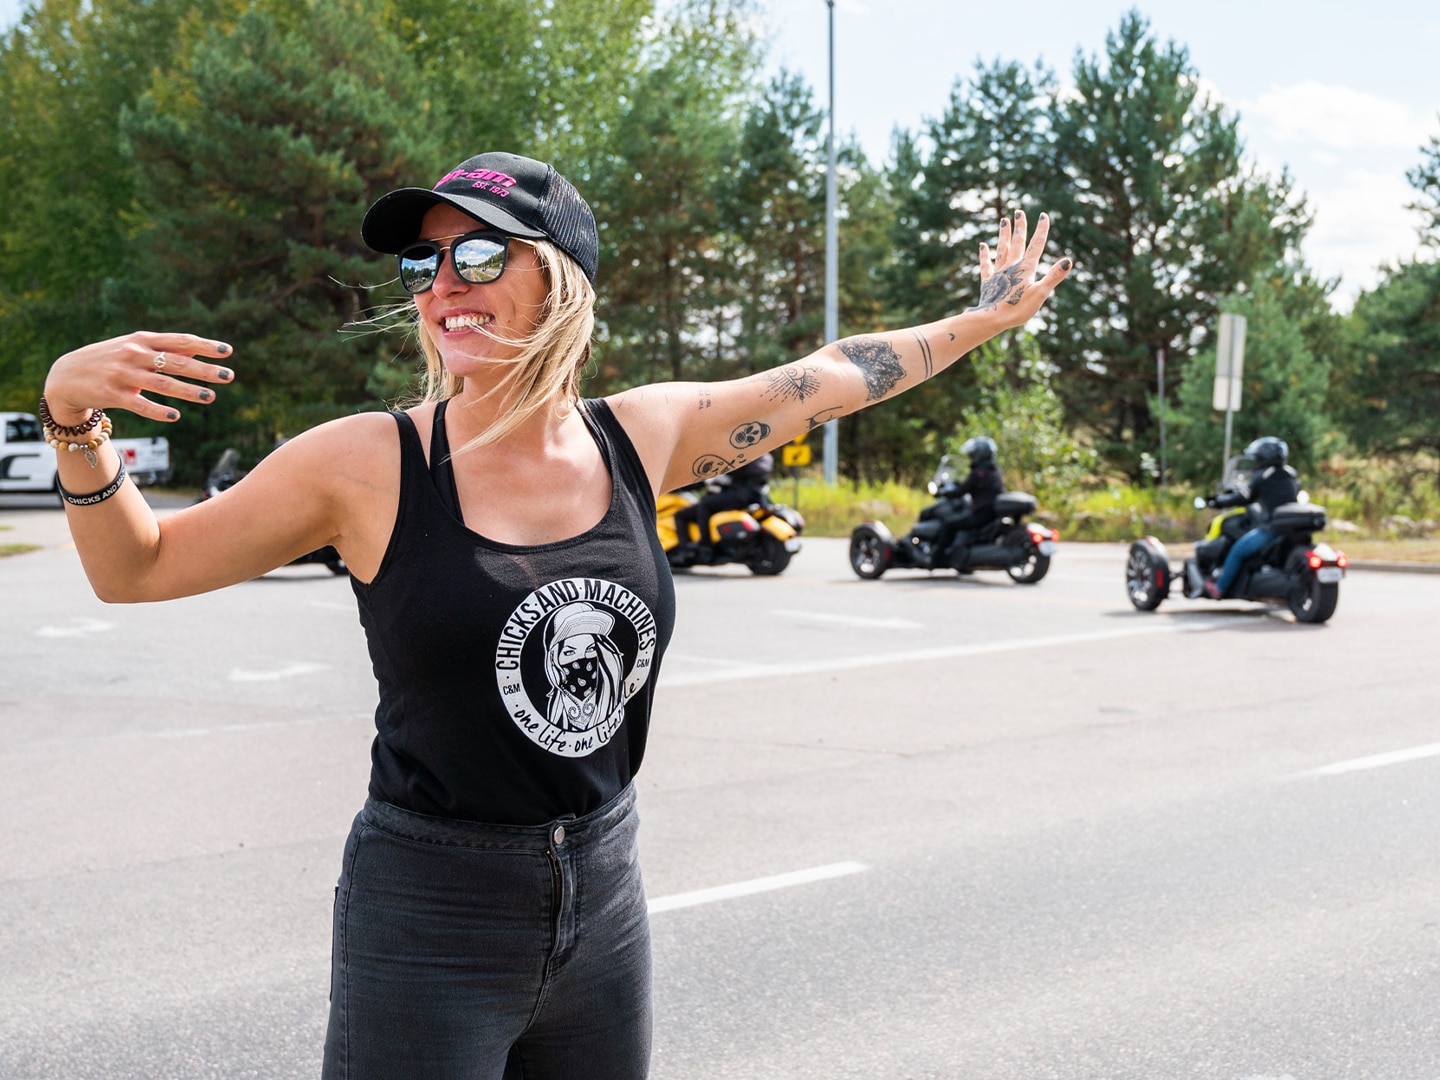 A woman giving 3-wheel riders directions